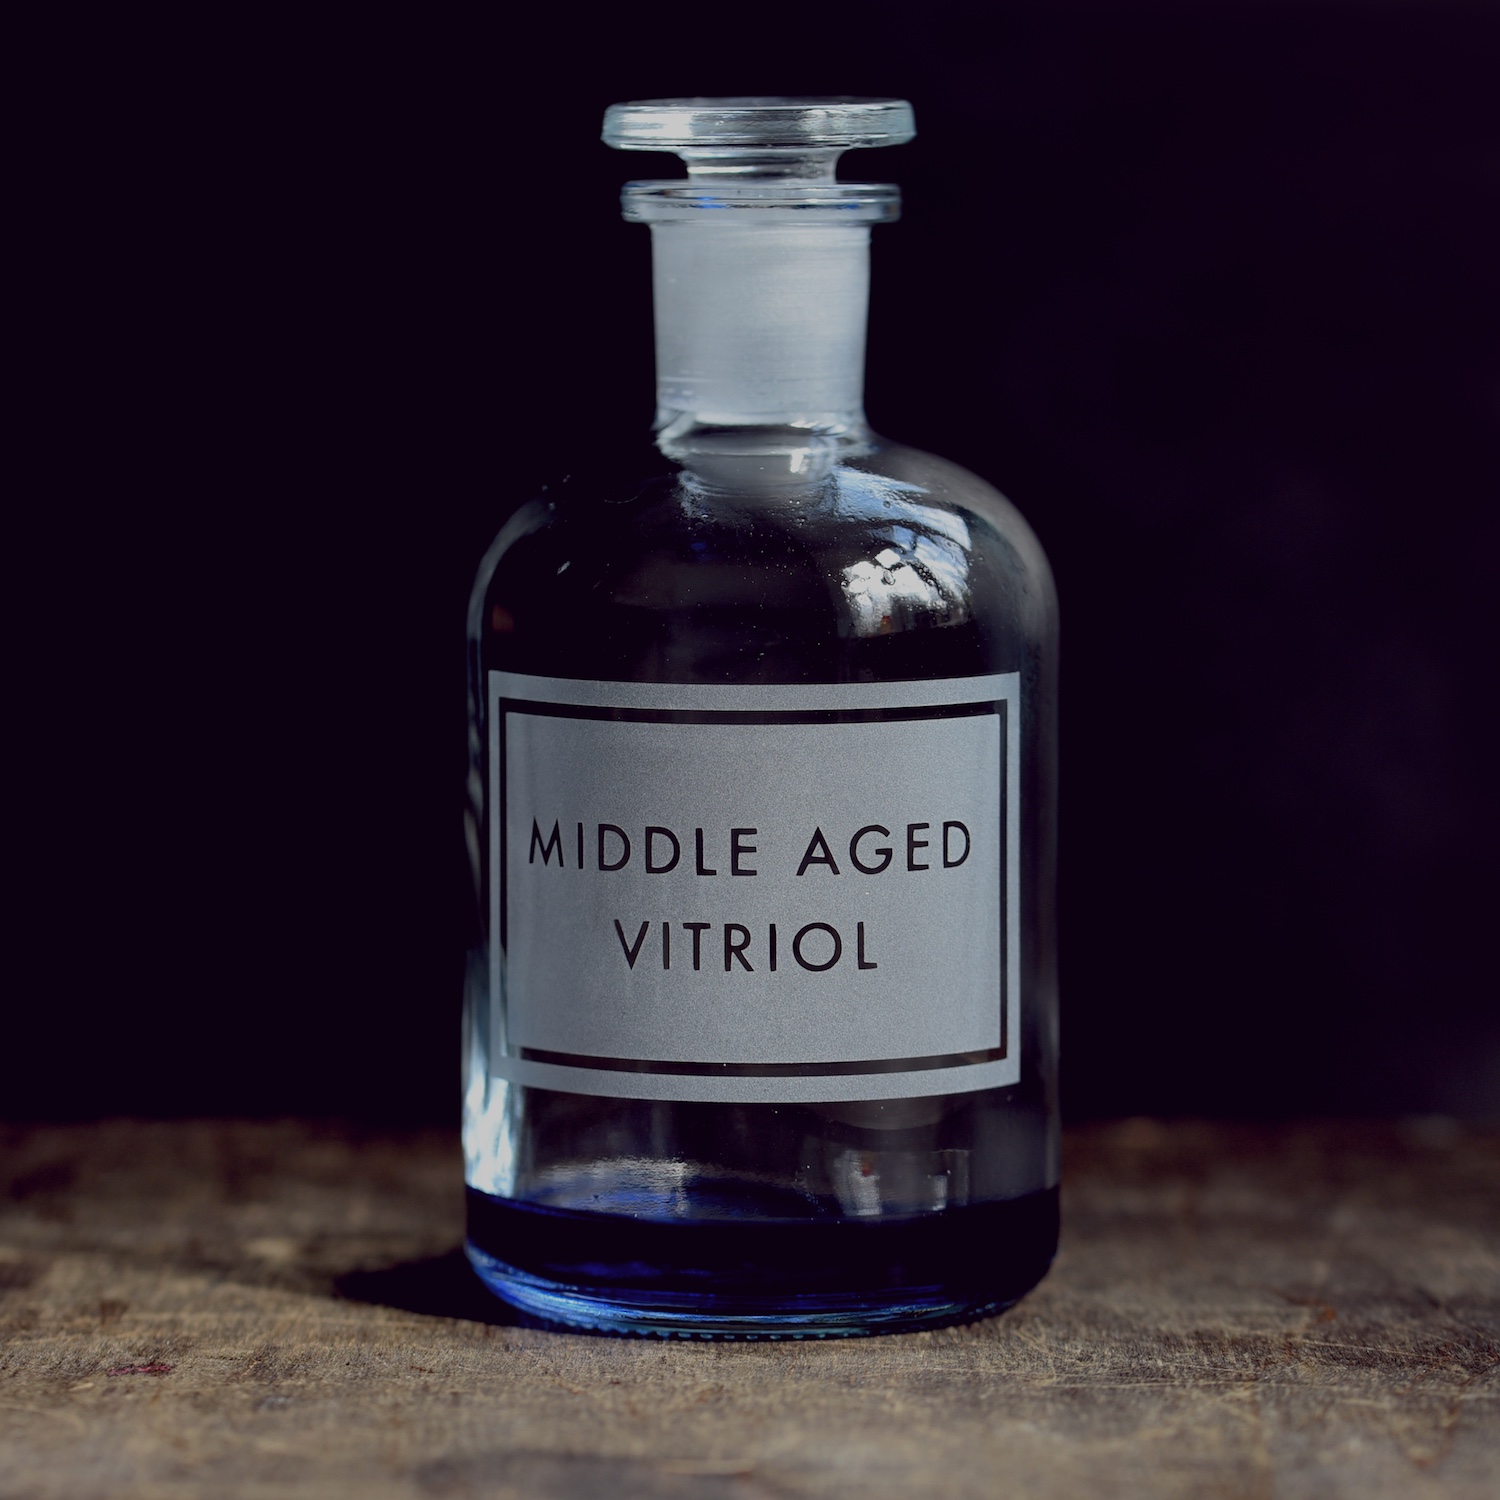 Hey, Vitriol!!! Middle-aged-vitriol-etched-apothecary-bottle-vinegar-and-brown-paper